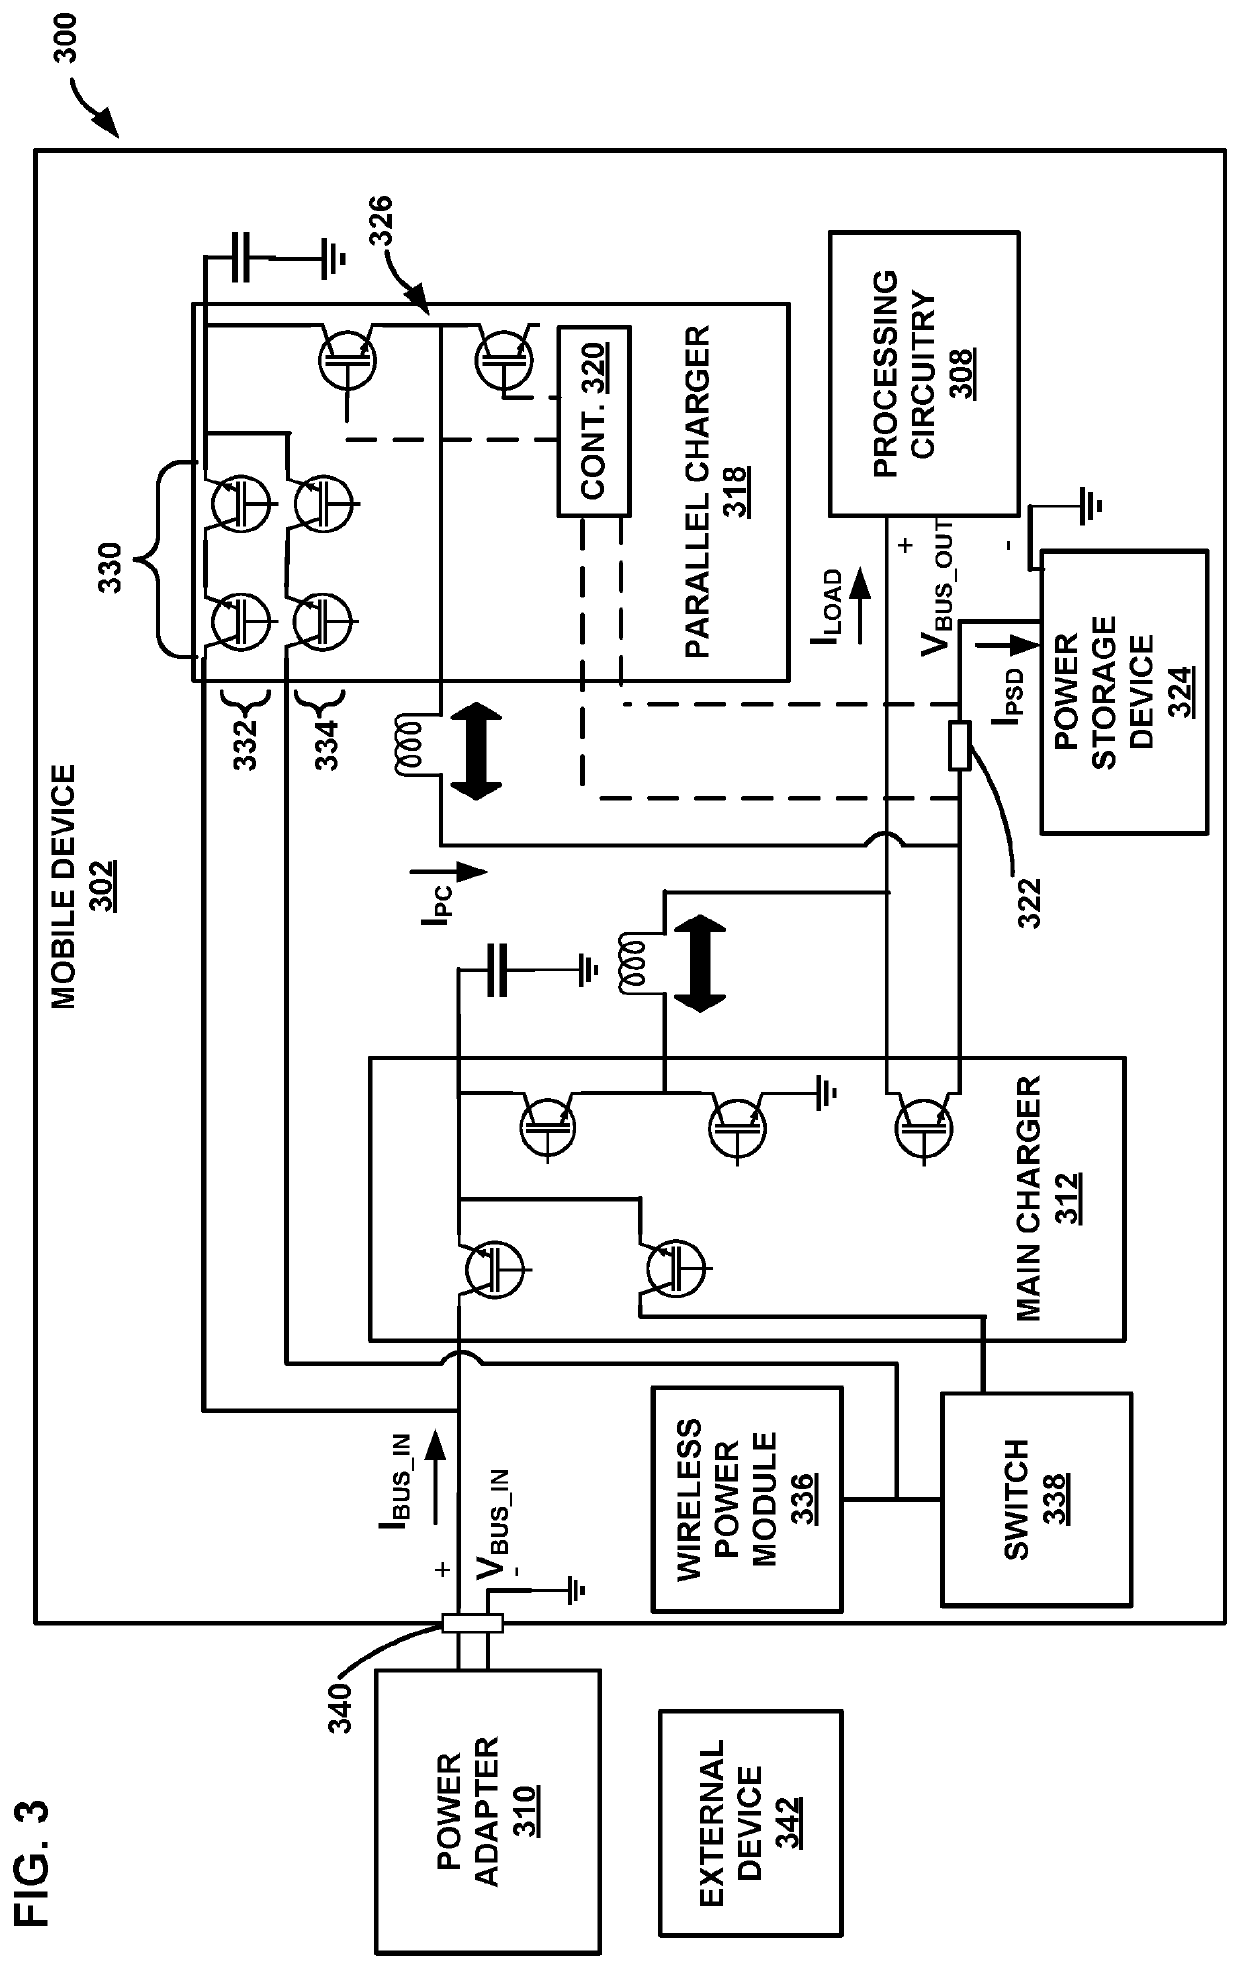 Parallel charger circuit with battery feedback control